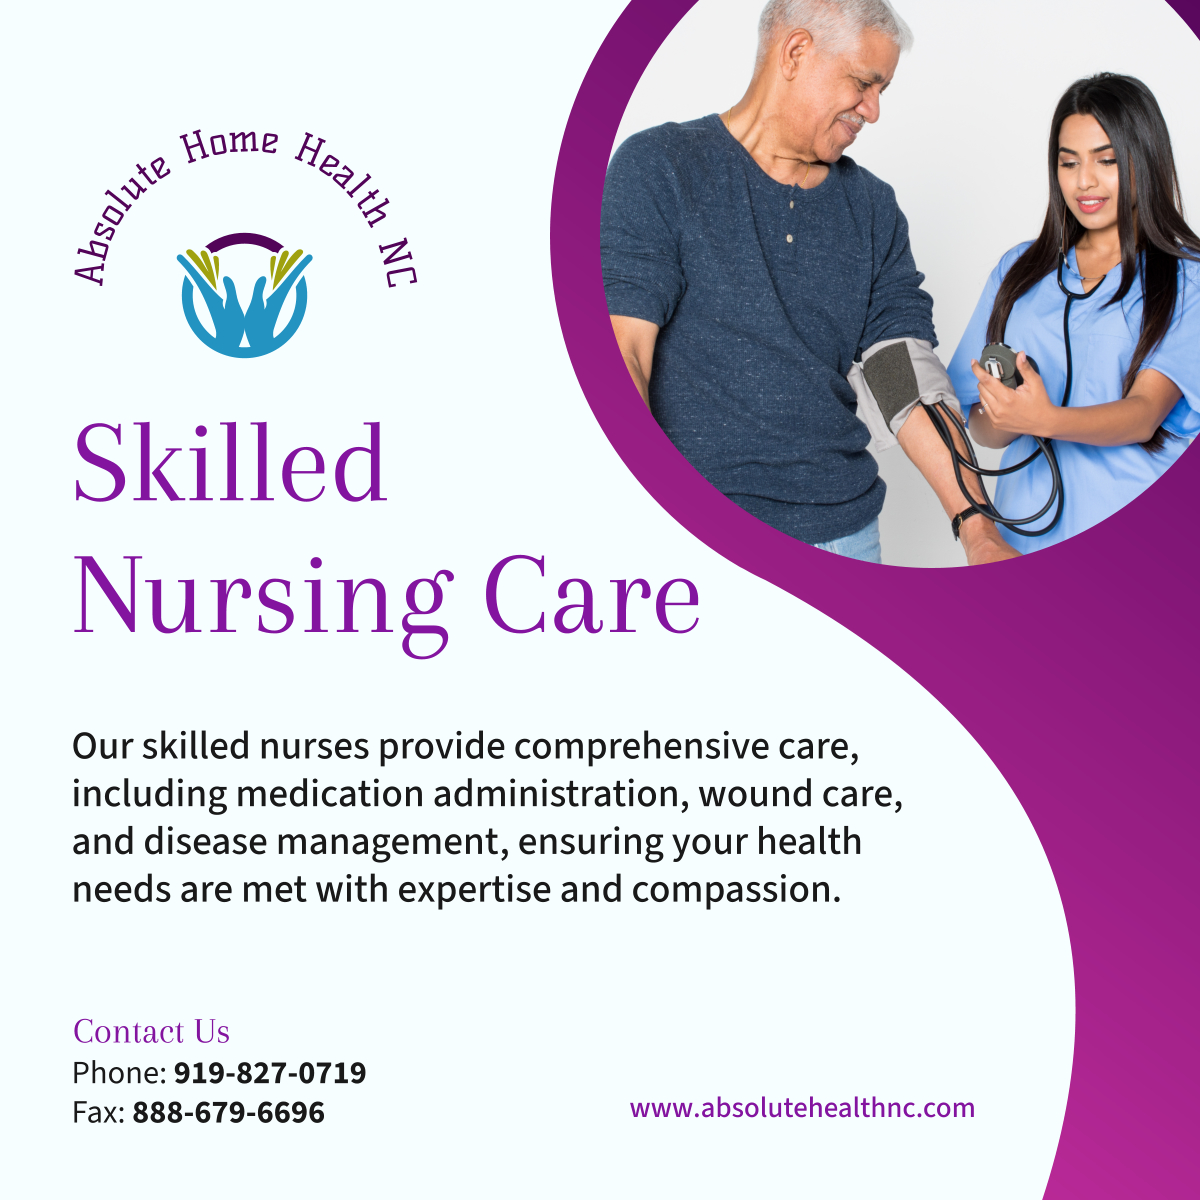 Experience expert nursing care tailored to your needs. Call us today for compassionate support and personalized treatment. 

#HomeHealthCare #RaleighNC #SkilledNursing